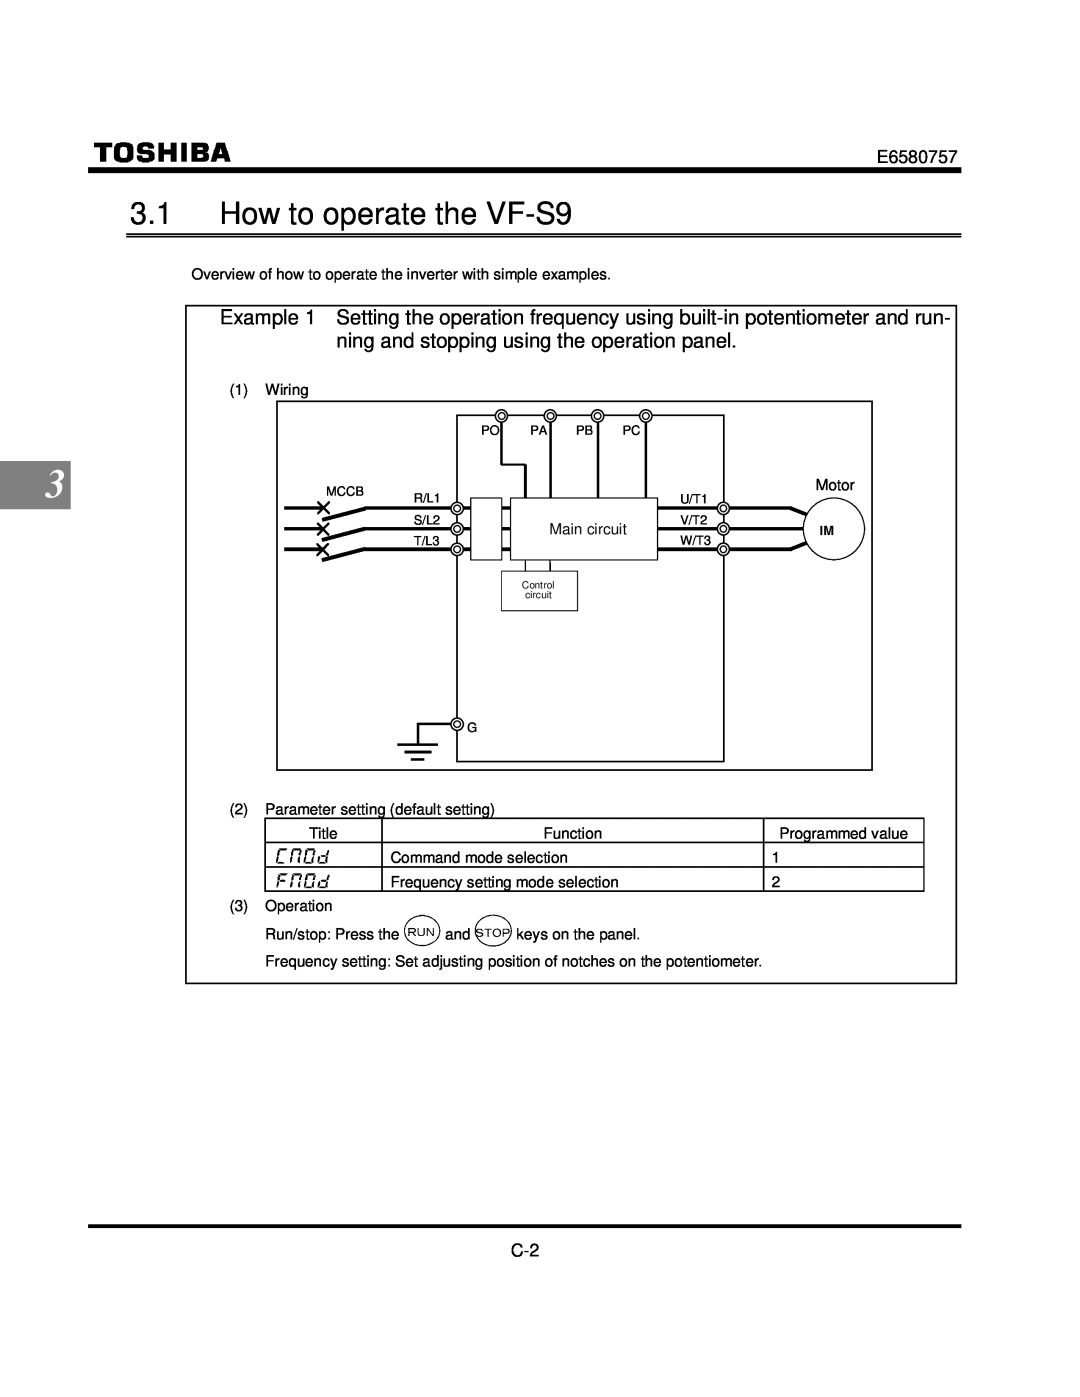 Toshiba manual How to operate the VF-S9 